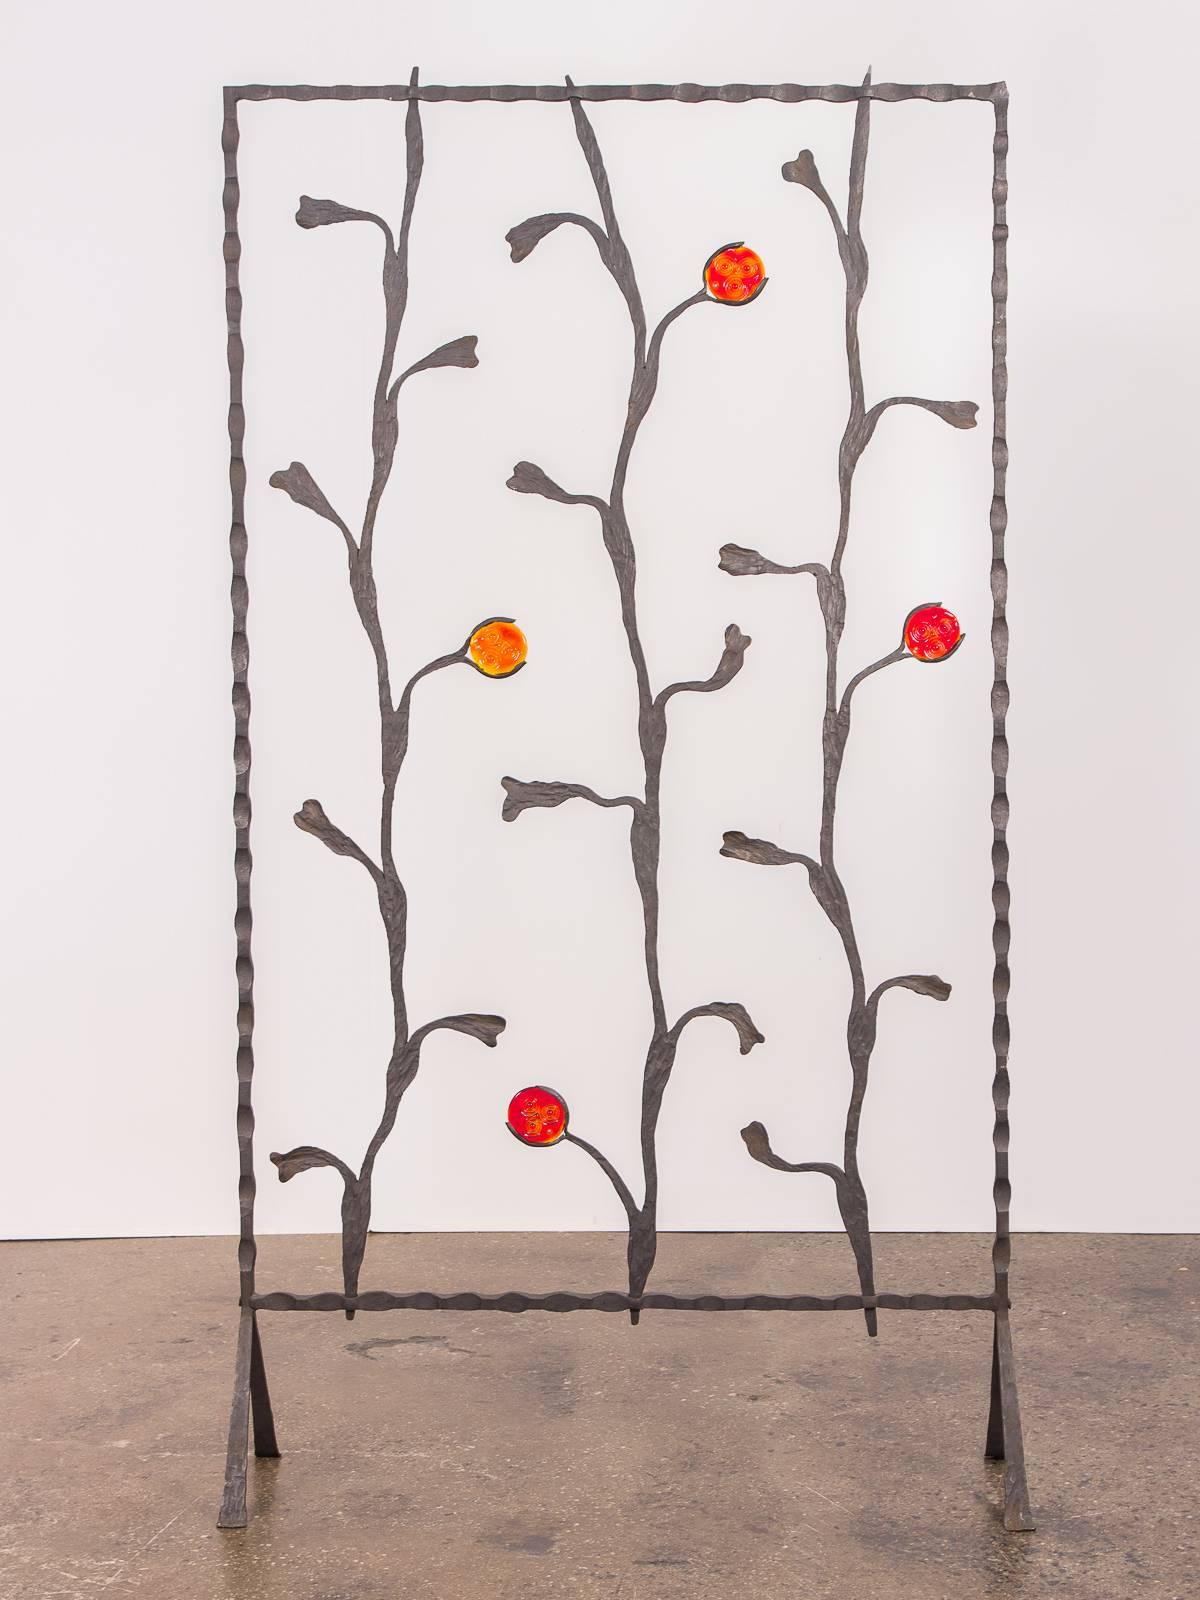 Brilliant and uniquely constructed, artisan free-standing wrought iron screen. Acquired from the original owner, this stunning decorative arts piece was purchased back in the early 1960s at an arts fair to showcase Eastern European art and artisans.